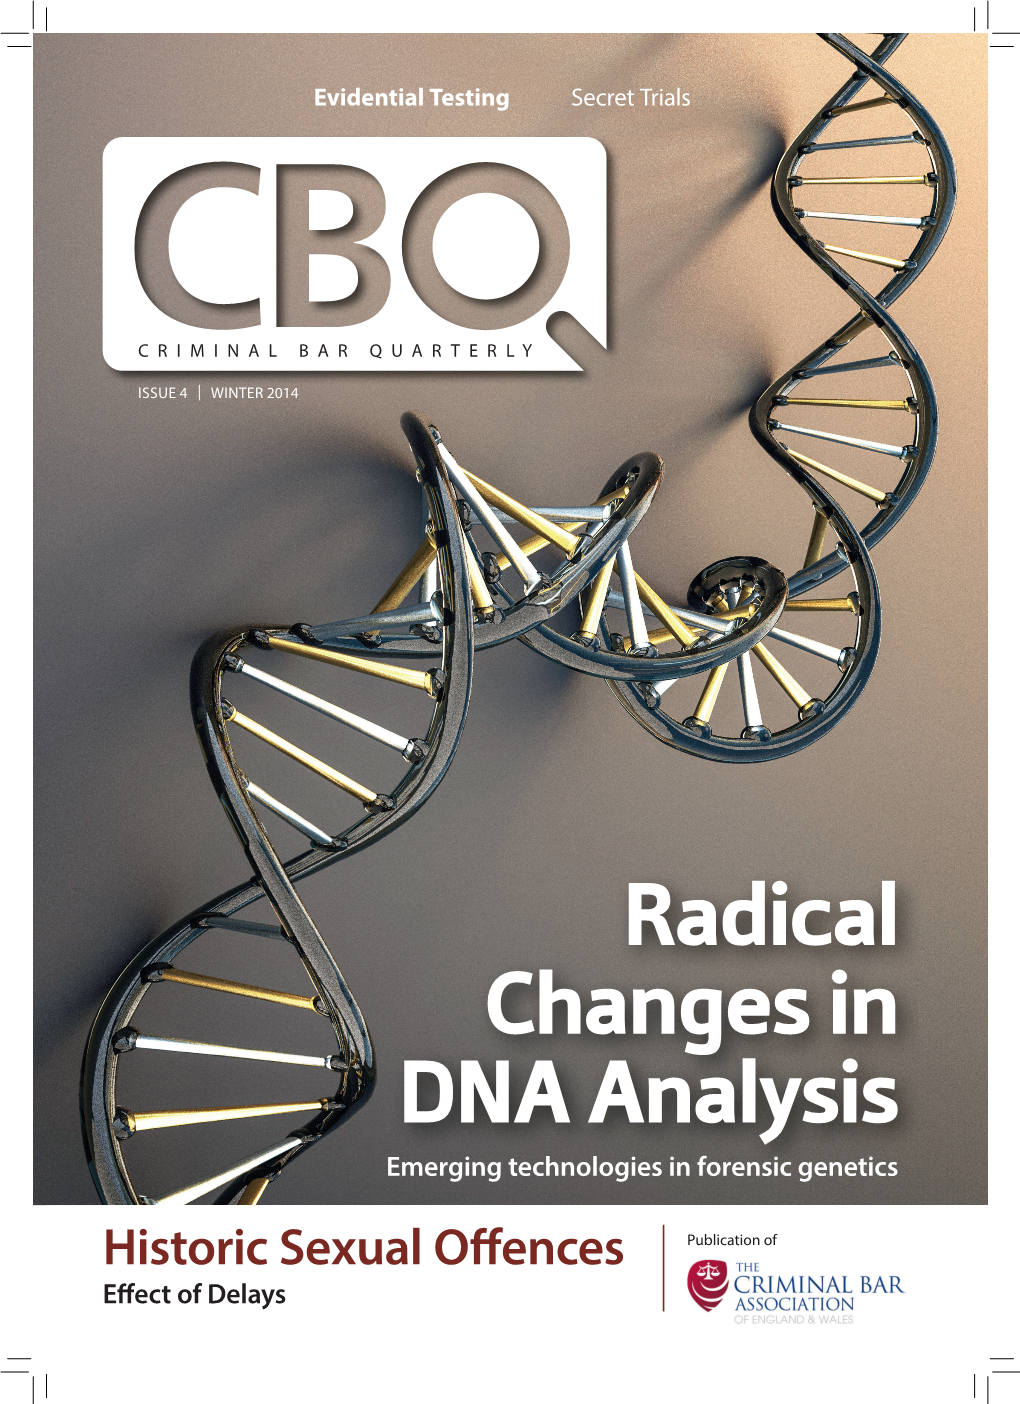 Radical Changes in DNA Analysis Emerging Technologies in Forensic Genetics